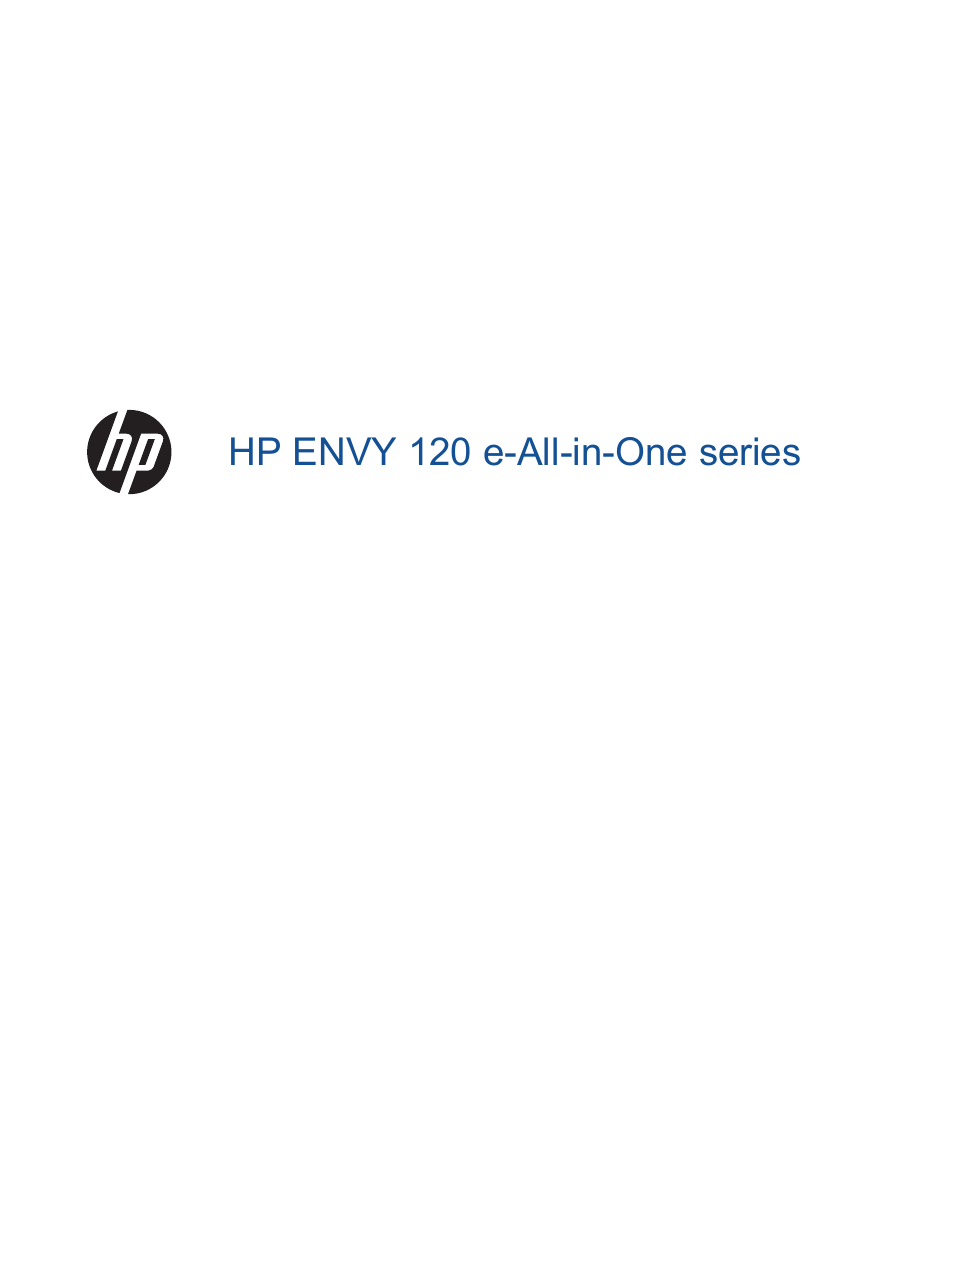 HP ENVY 120 e-All-in-One Printer User Manual | 62 pages